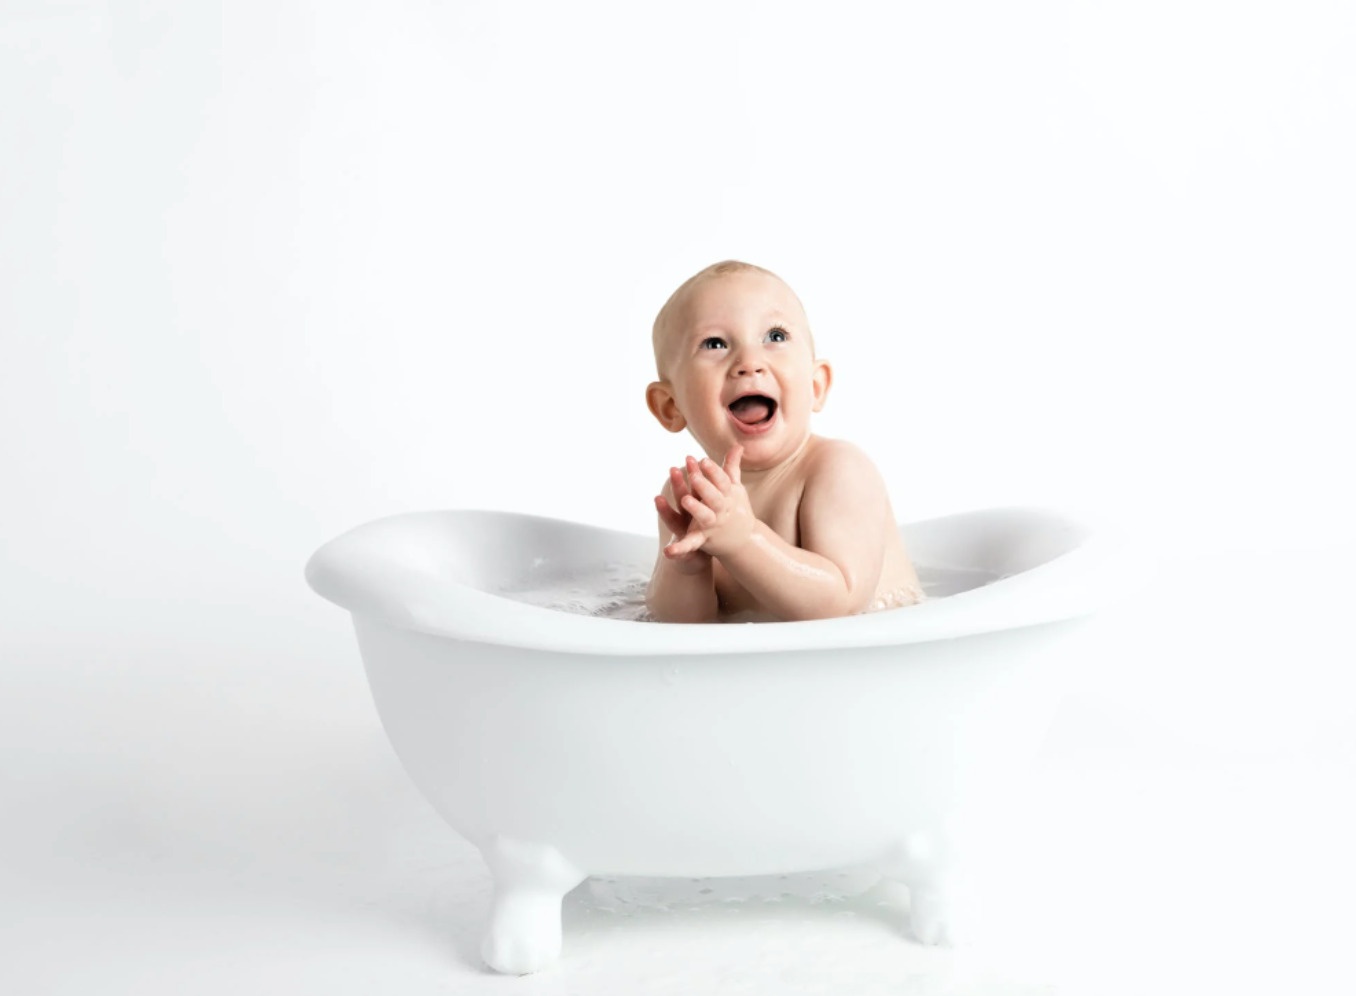 This baby seems happy to have a tub his size.  Photo credit: Henley Design Studio / Pexels